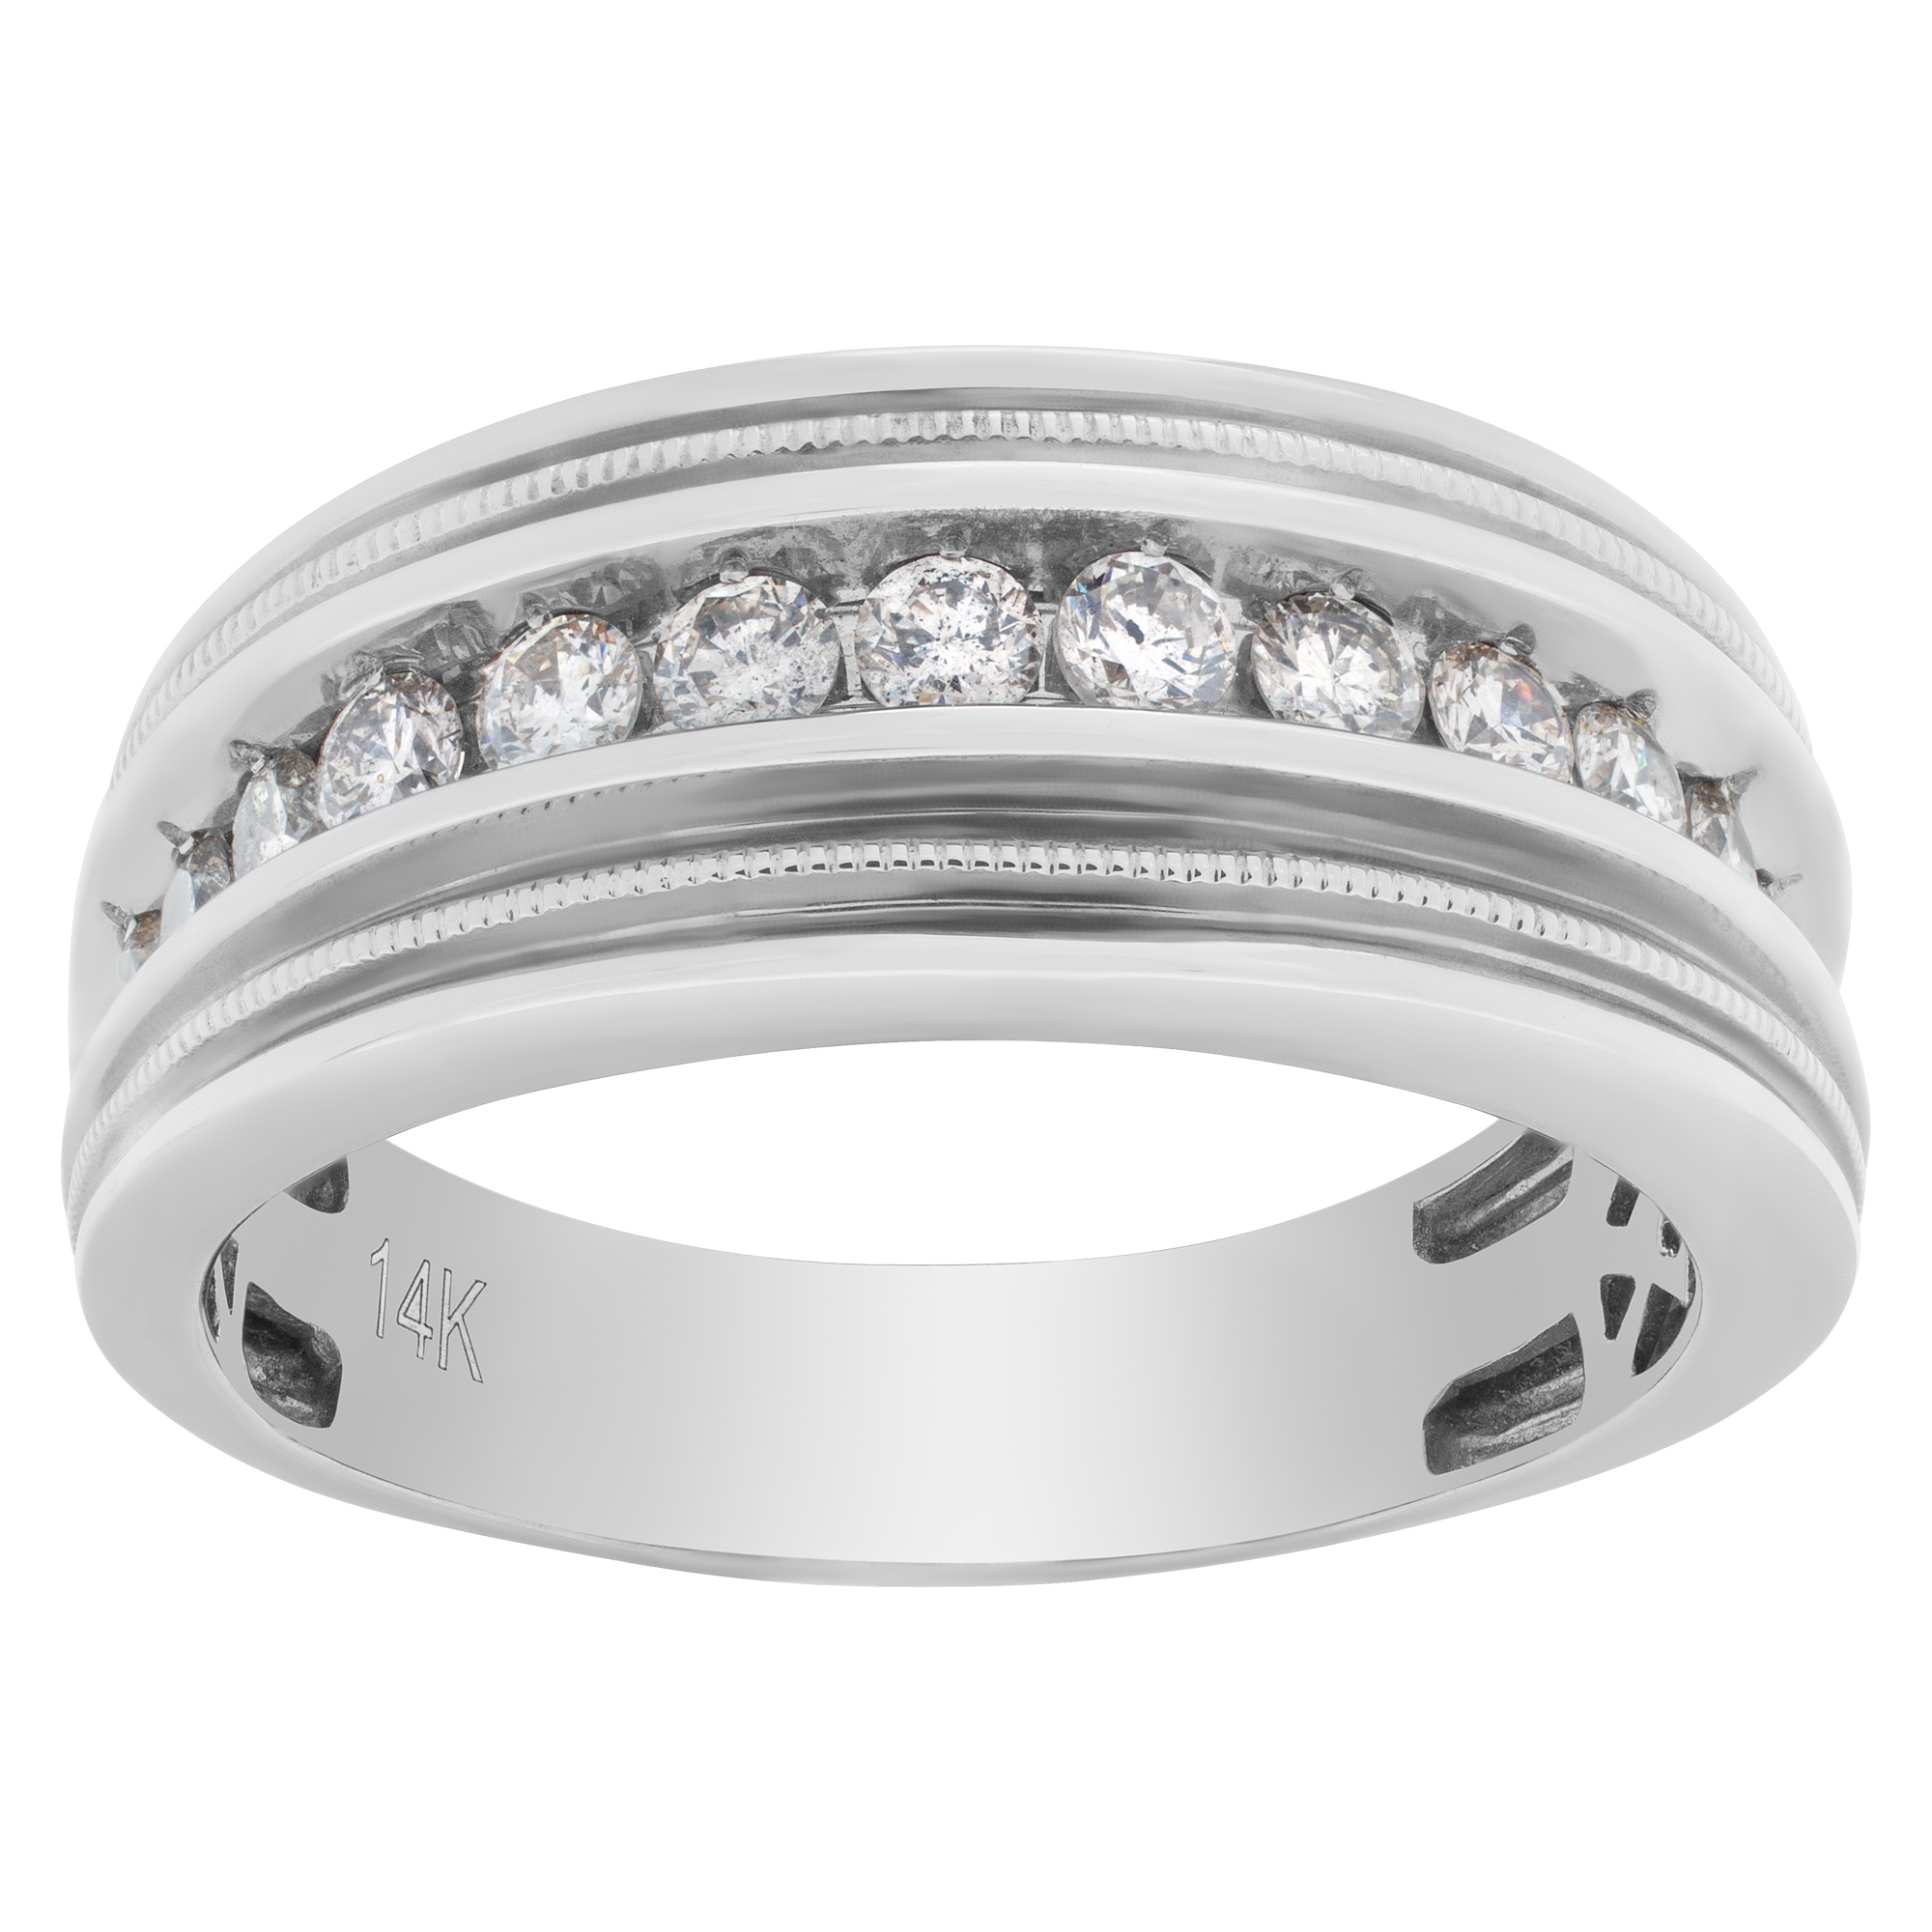 Diamond ring in 14k white gold with approx. 1 carat full cut round brilliant diamonds. image 1